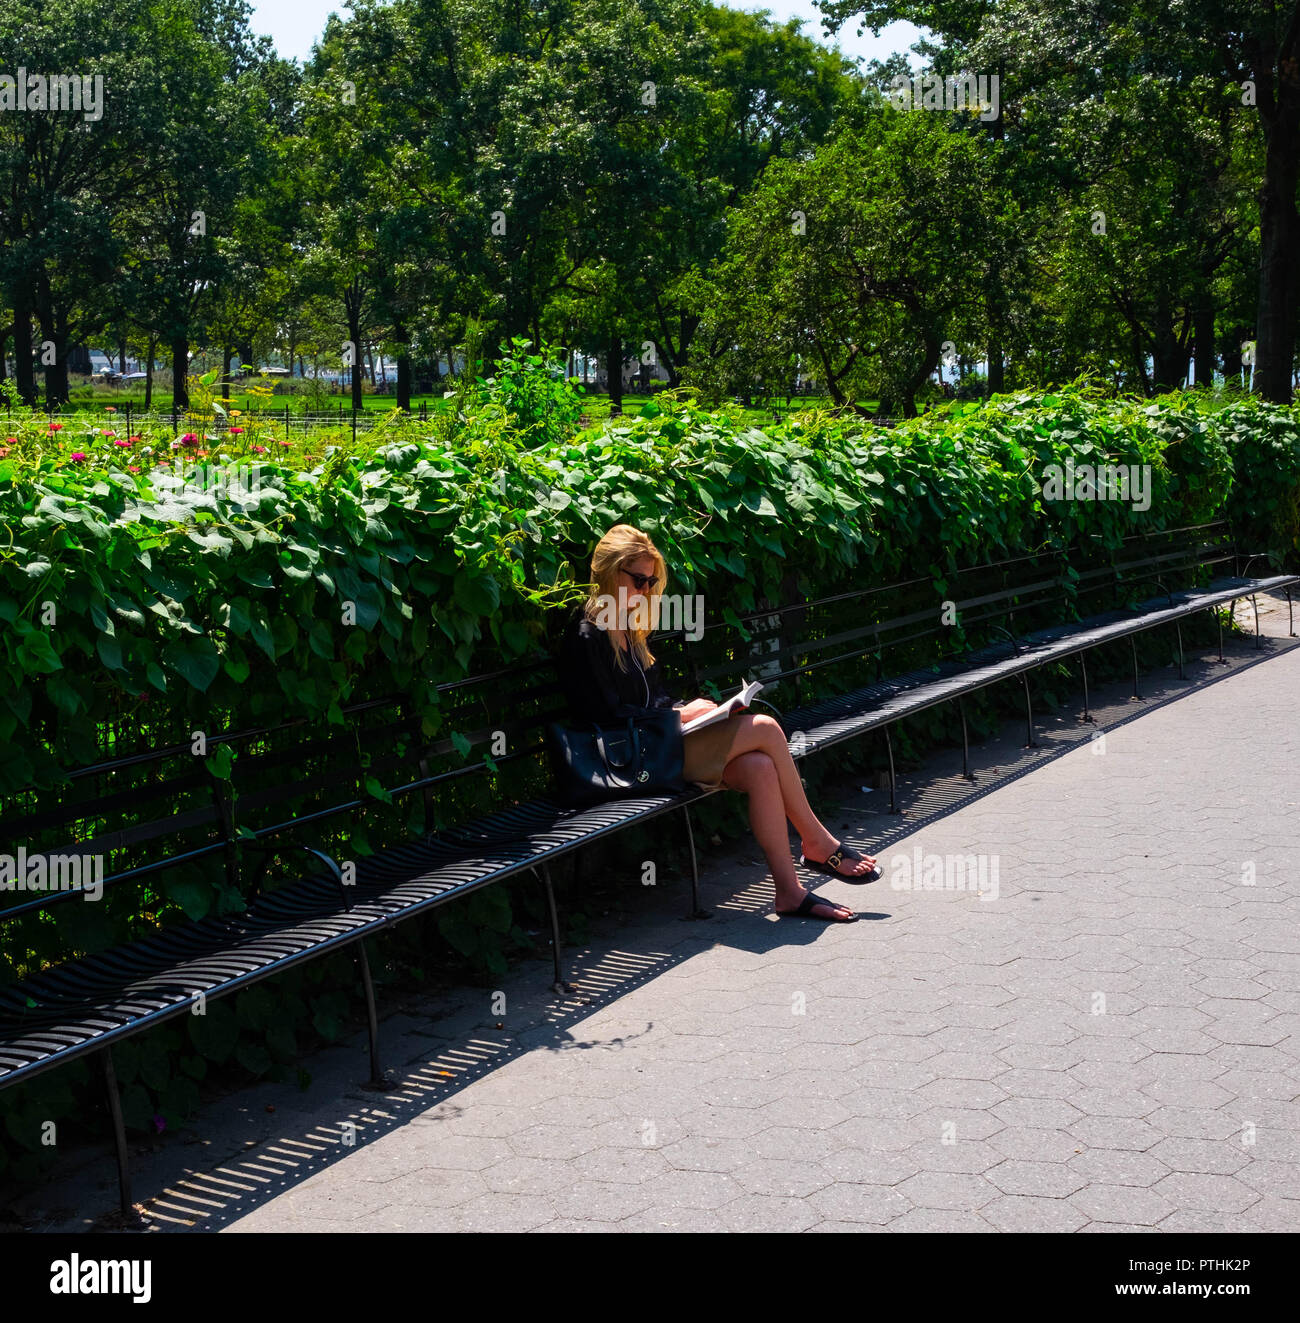 A young woman in sunglasses relaxes in the peace and sunshine of Battery Park, New York by sitting on a bench and reading a book on a lovely sunny day Stock Photo